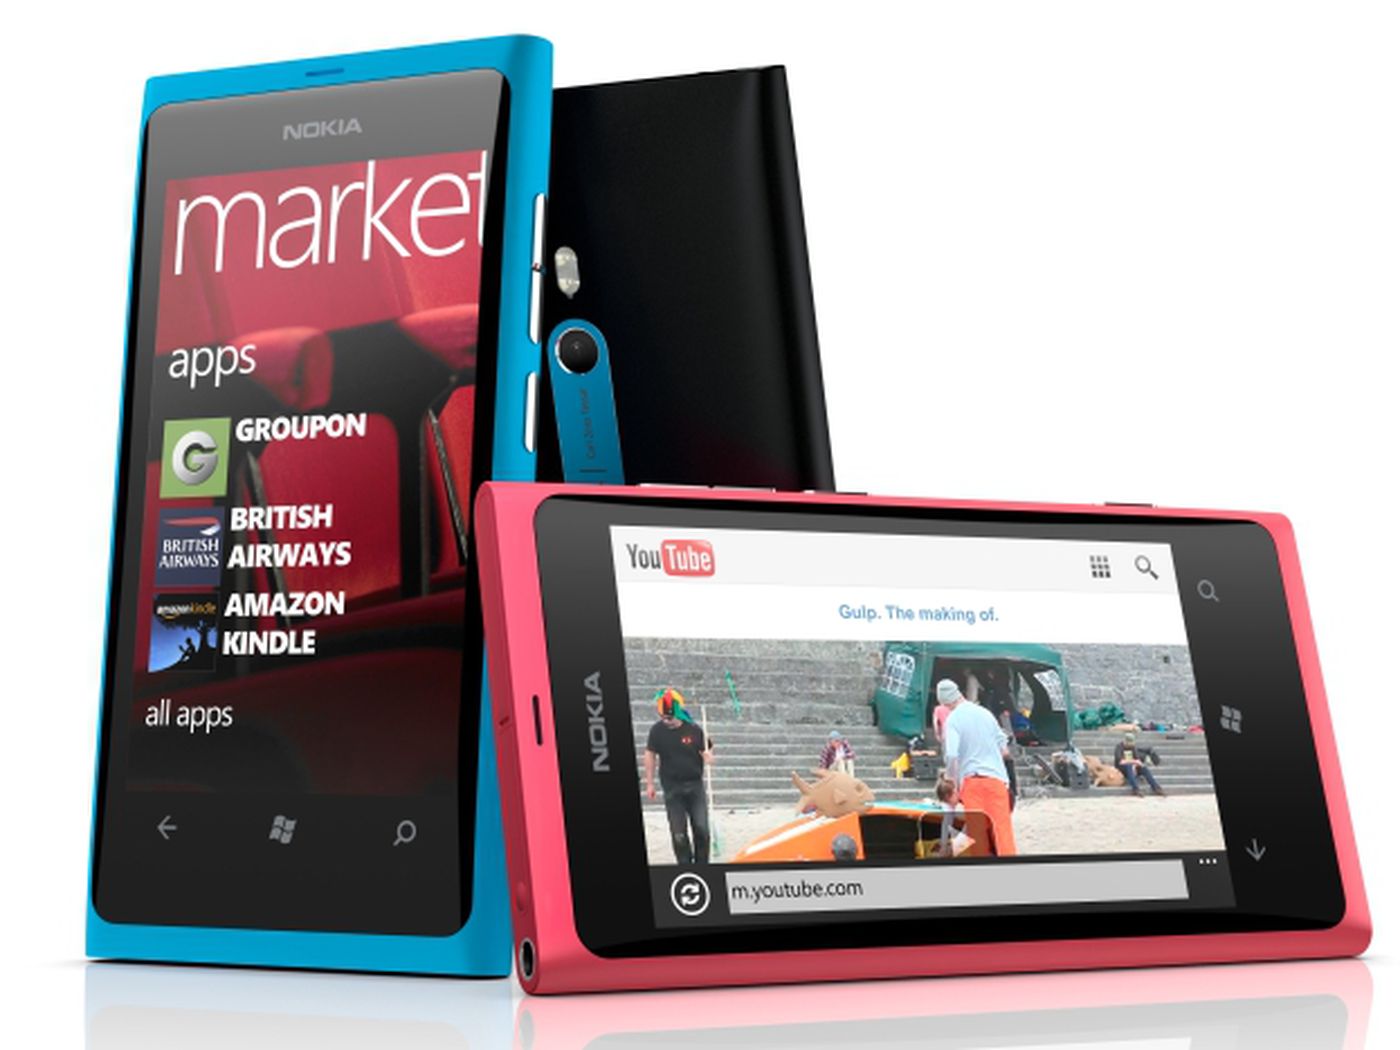 How To Download Music To My Nokia Lumia 800